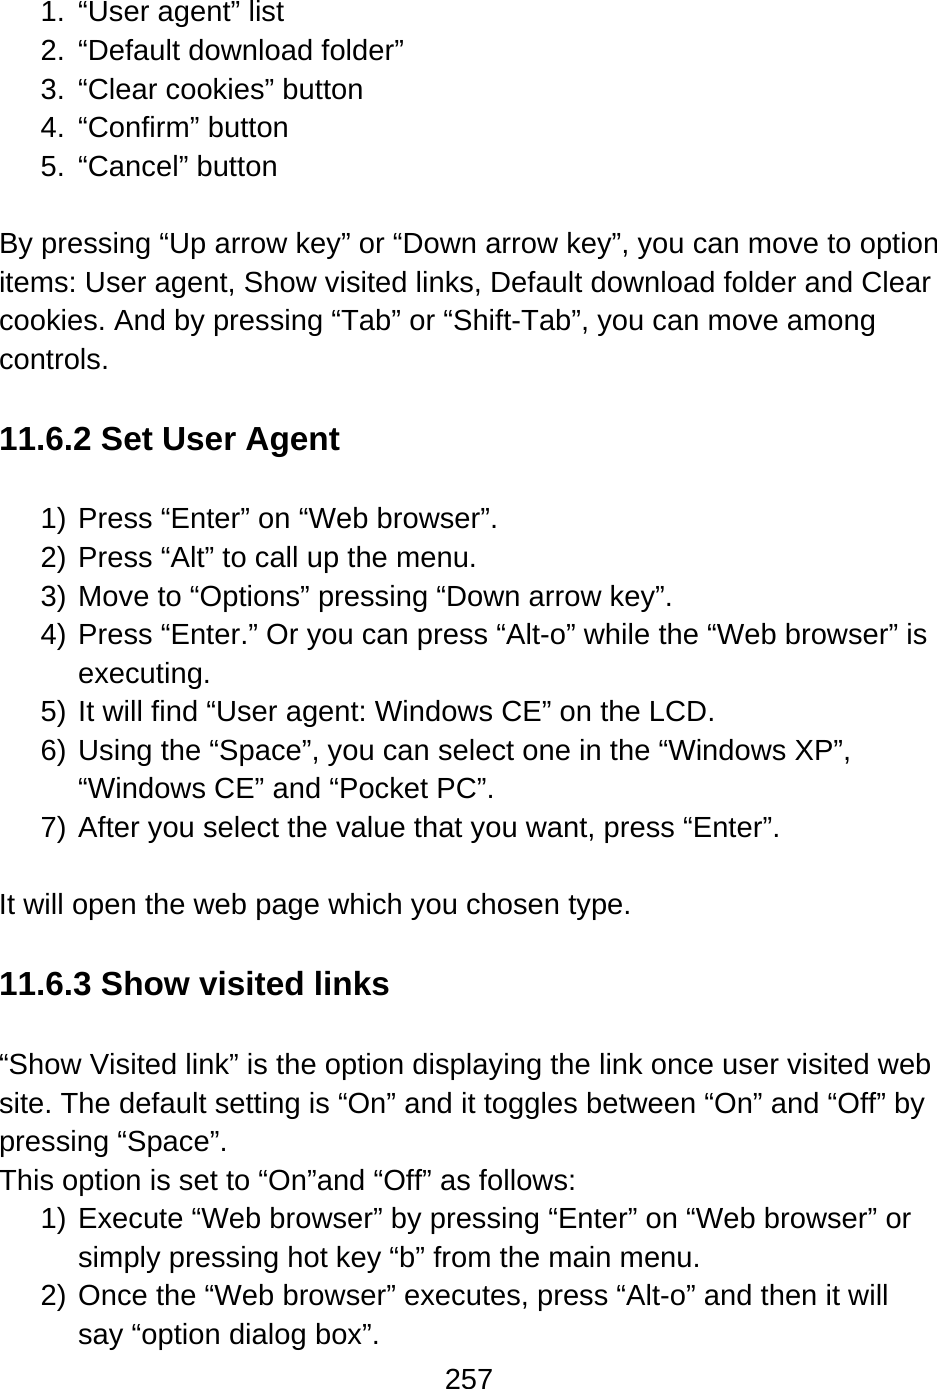 257   1.  “User agent” list 2.  “Default download folder”   3.  “Clear cookies” button 4. “Confirm” button 5. “Cancel” button  By pressing “Up arrow key” or “Down arrow key”, you can move to option items: User agent, Show visited links, Default download folder and Clear cookies. And by pressing “Tab” or “Shift-Tab”, you can move among controls.    11.6.2 Set User Agent  1) Press “Enter” on “Web browser”. 2) Press “Alt” to call up the menu. 3) Move to “Options” pressing “Down arrow key”. 4) Press “Enter.” Or you can press “Alt-o” while the “Web browser” is executing. 5) It will find “User agent: Windows CE” on the LCD. 6) Using the “Space”, you can select one in the “Windows XP”, “Windows CE” and “Pocket PC”. 7) After you select the value that you want, press “Enter”.  It will open the web page which you chosen type.  11.6.3 Show visited links  “Show Visited link” is the option displaying the link once user visited web site. The default setting is “On” and it toggles between “On” and “Off” by pressing “Space”. This option is set to “On”and “Off” as follows: 1) Execute “Web browser” by pressing “Enter” on “Web browser” or simply pressing hot key “b” from the main menu. 2) Once the “Web browser” executes, press “Alt-o” and then it will say “option dialog box”. 